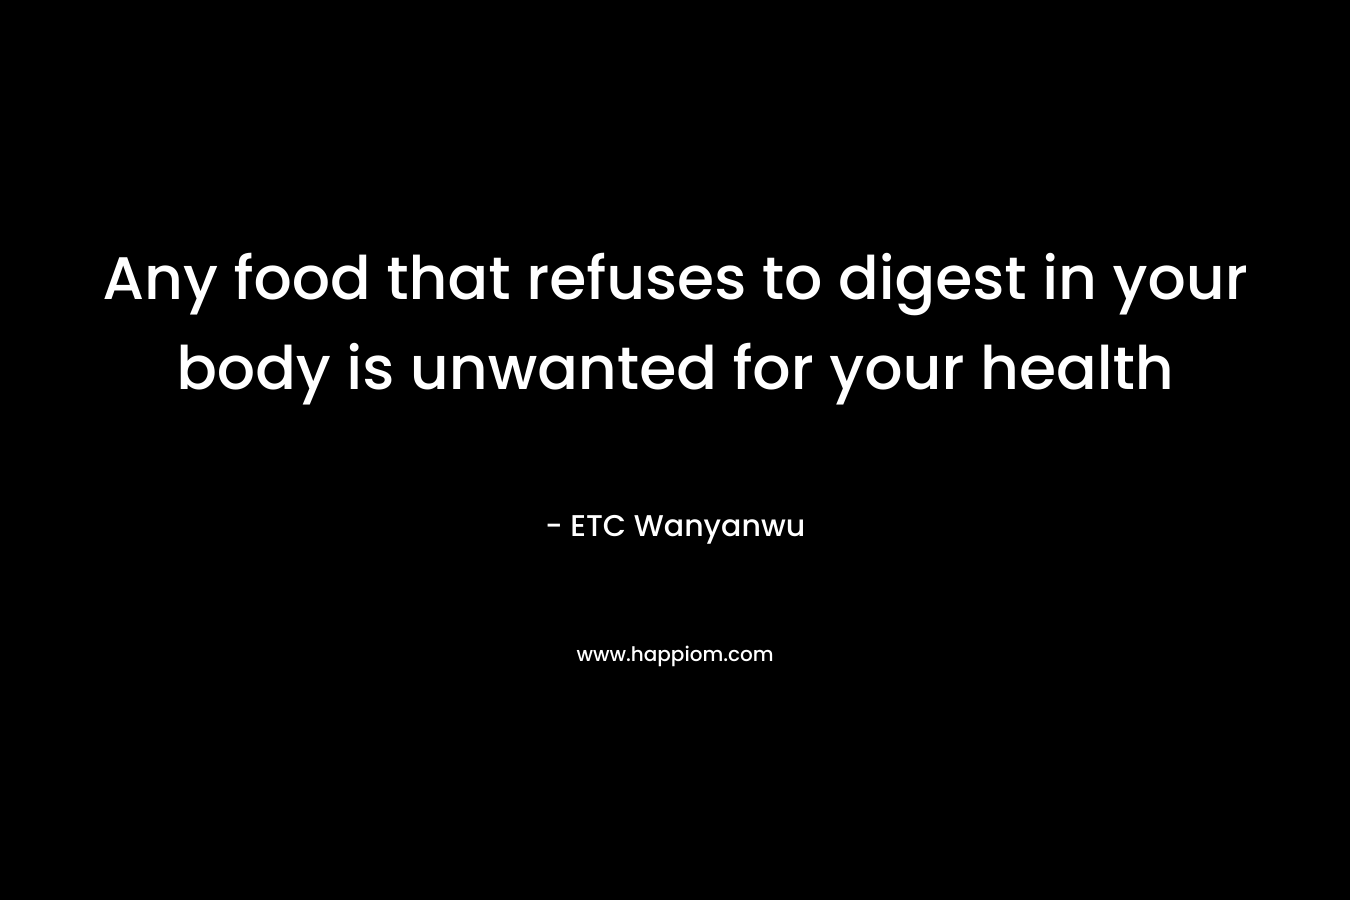 Any food that refuses to digest in your body is unwanted for your health – ETC Wanyanwu